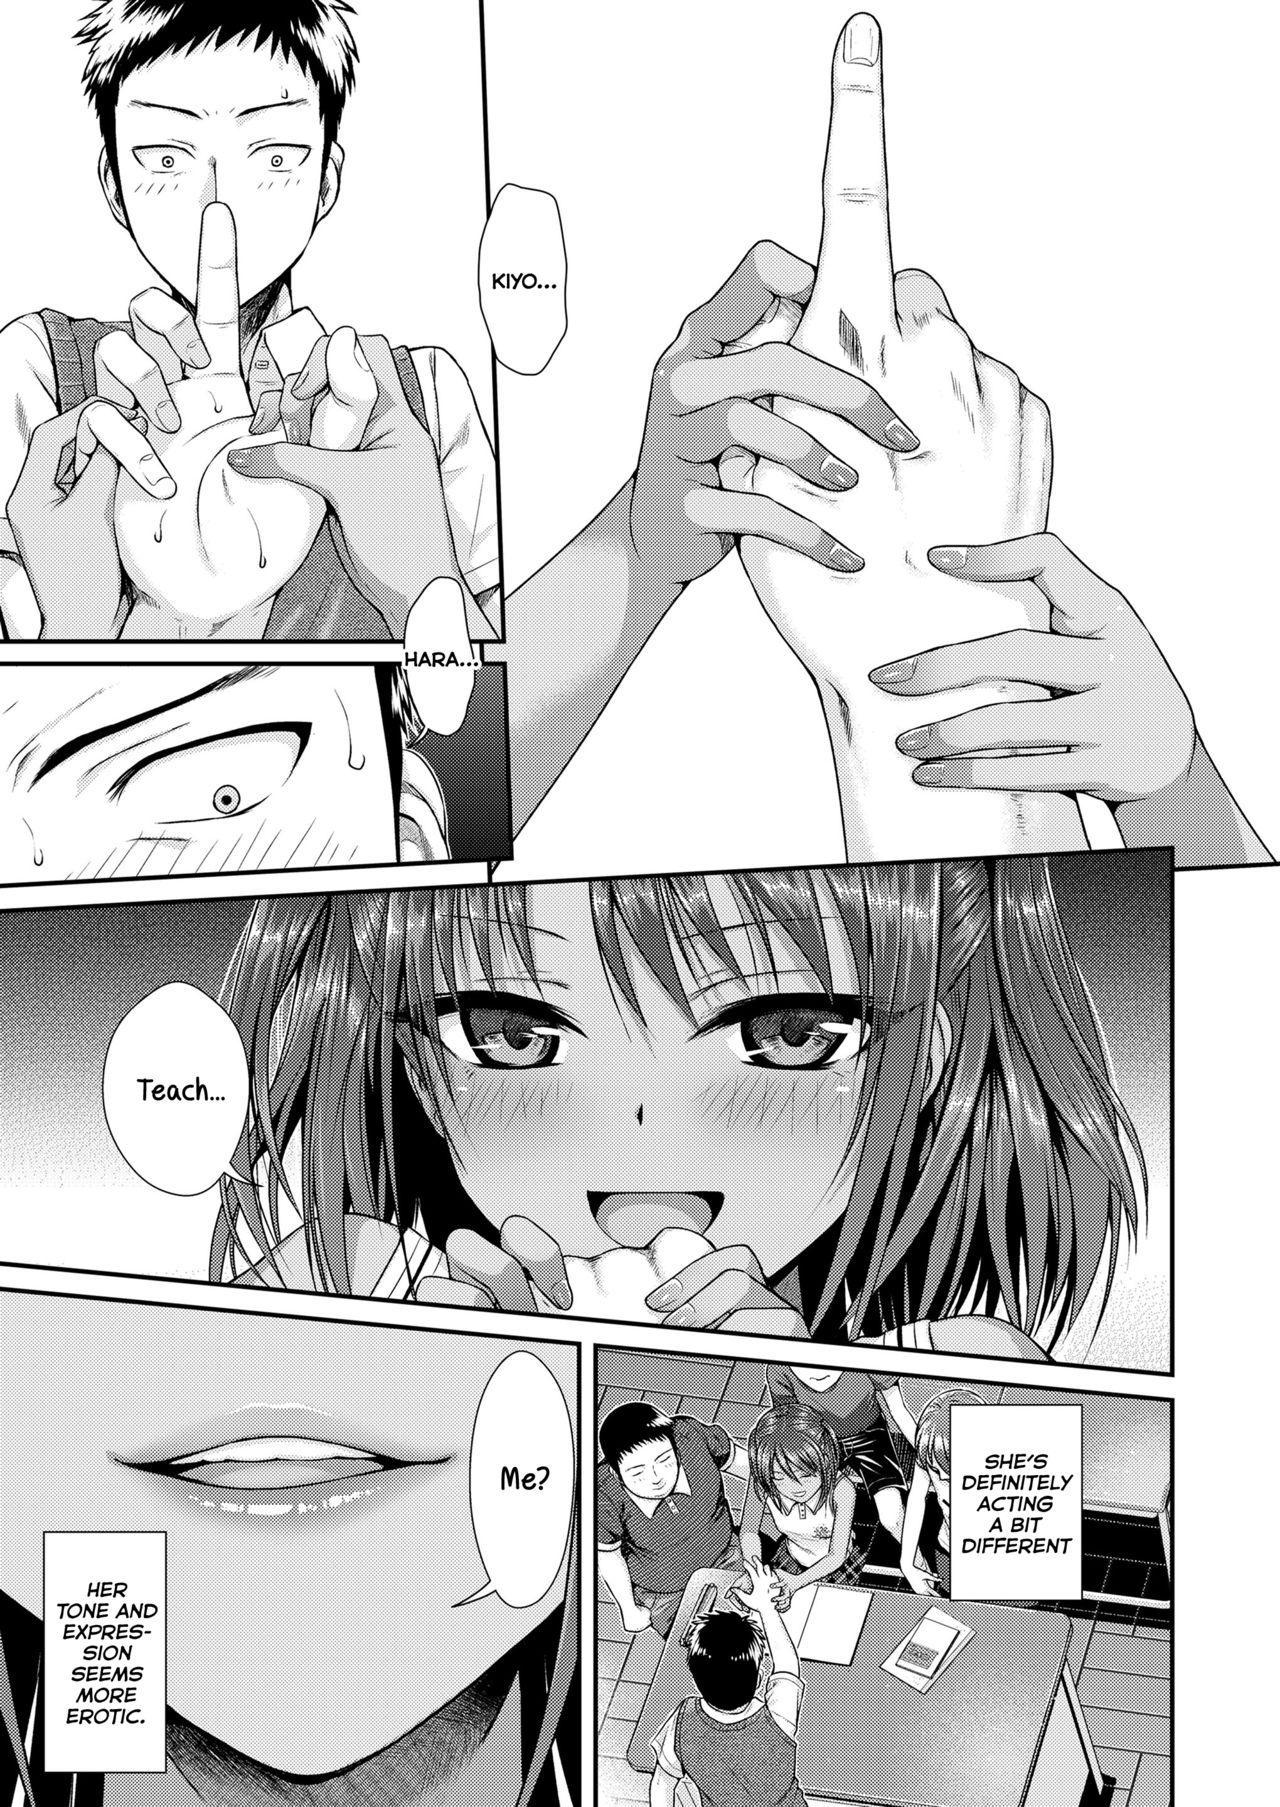 Spanish Houkago wa Minna de | Together With Everyone After School Blowjob Contest - Page 11